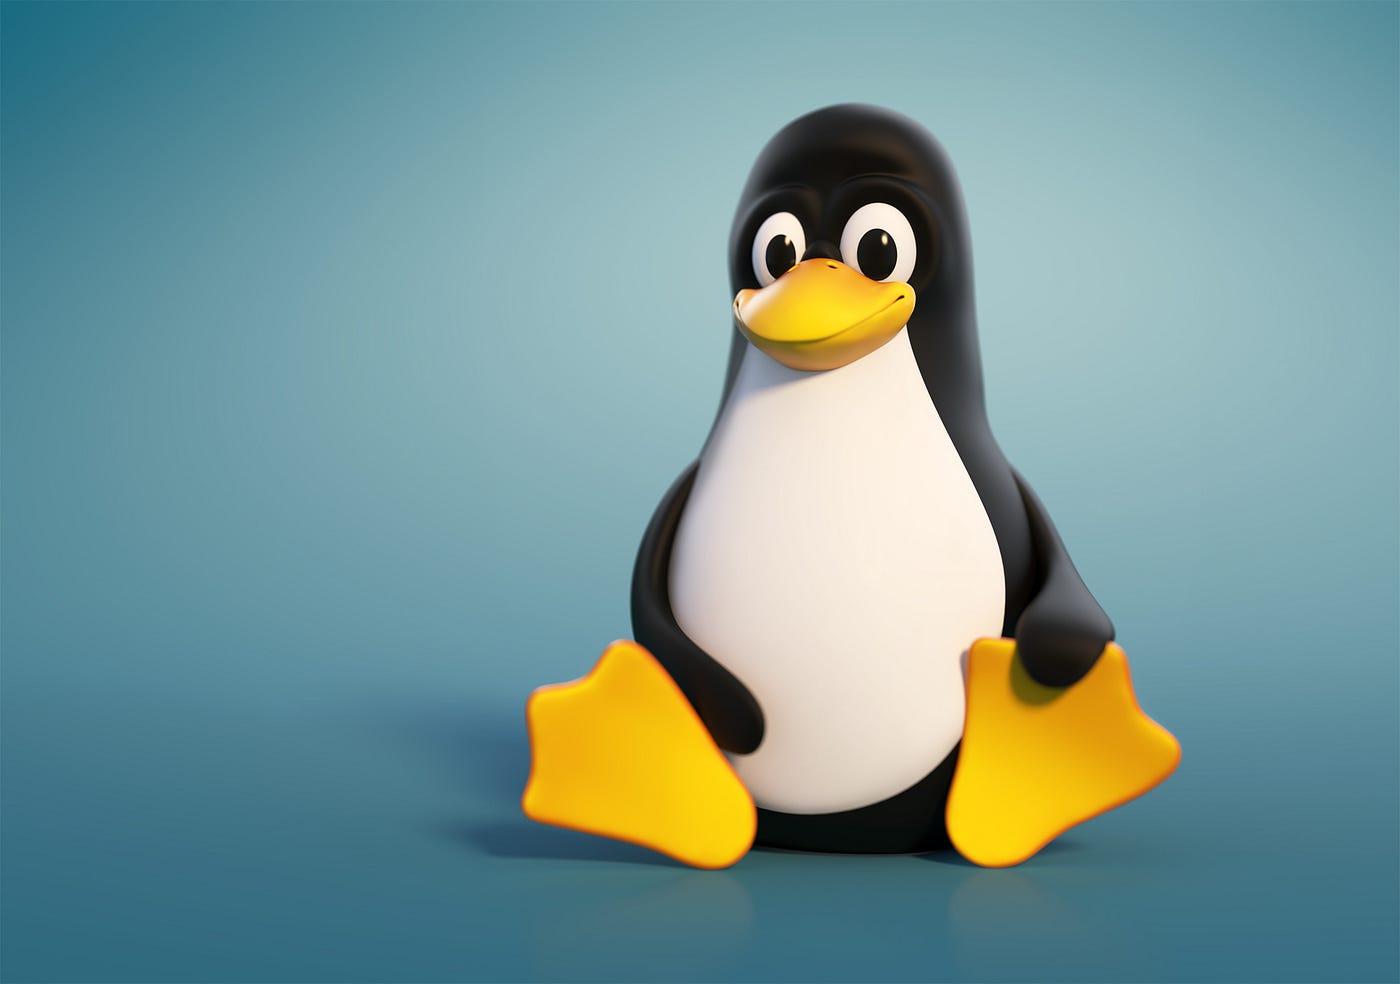 The Free Software Foundation: Windows 8 Is a Dud, Switch to Linux